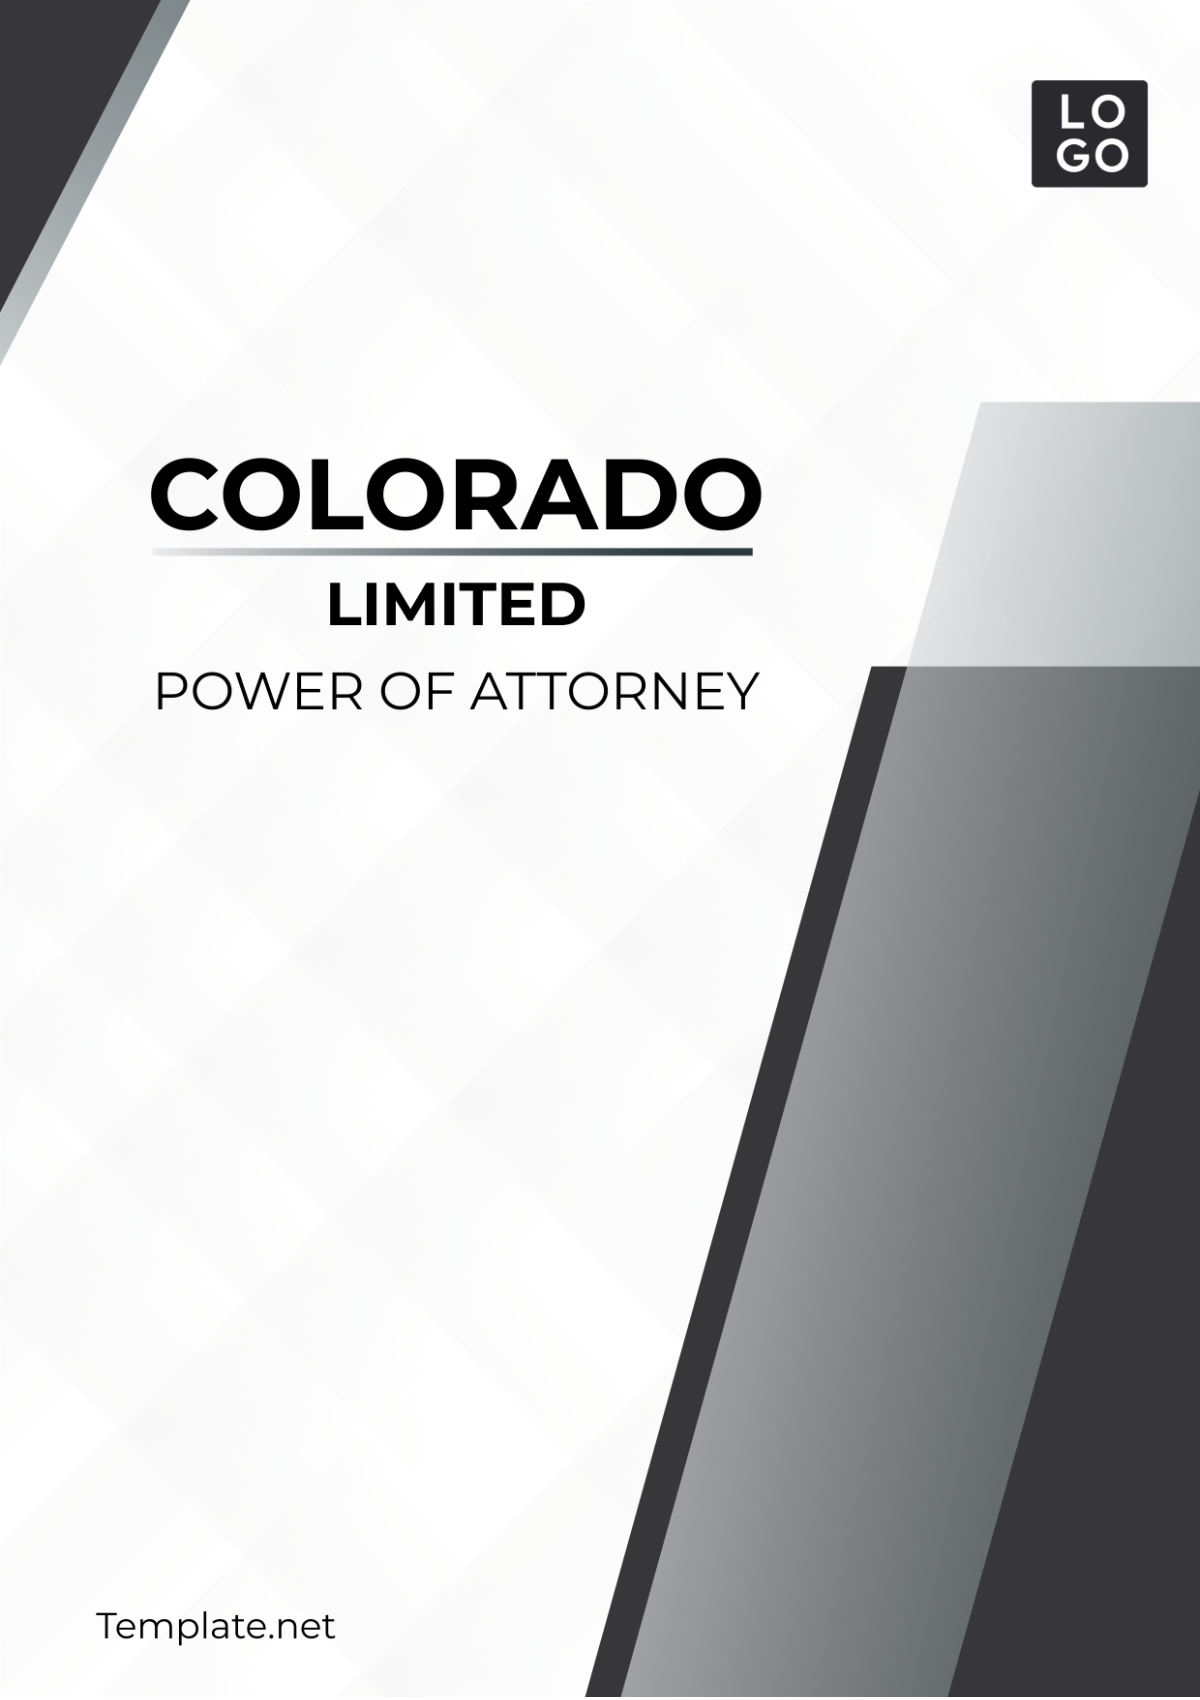 Colorado Limited Power of Attorney Template